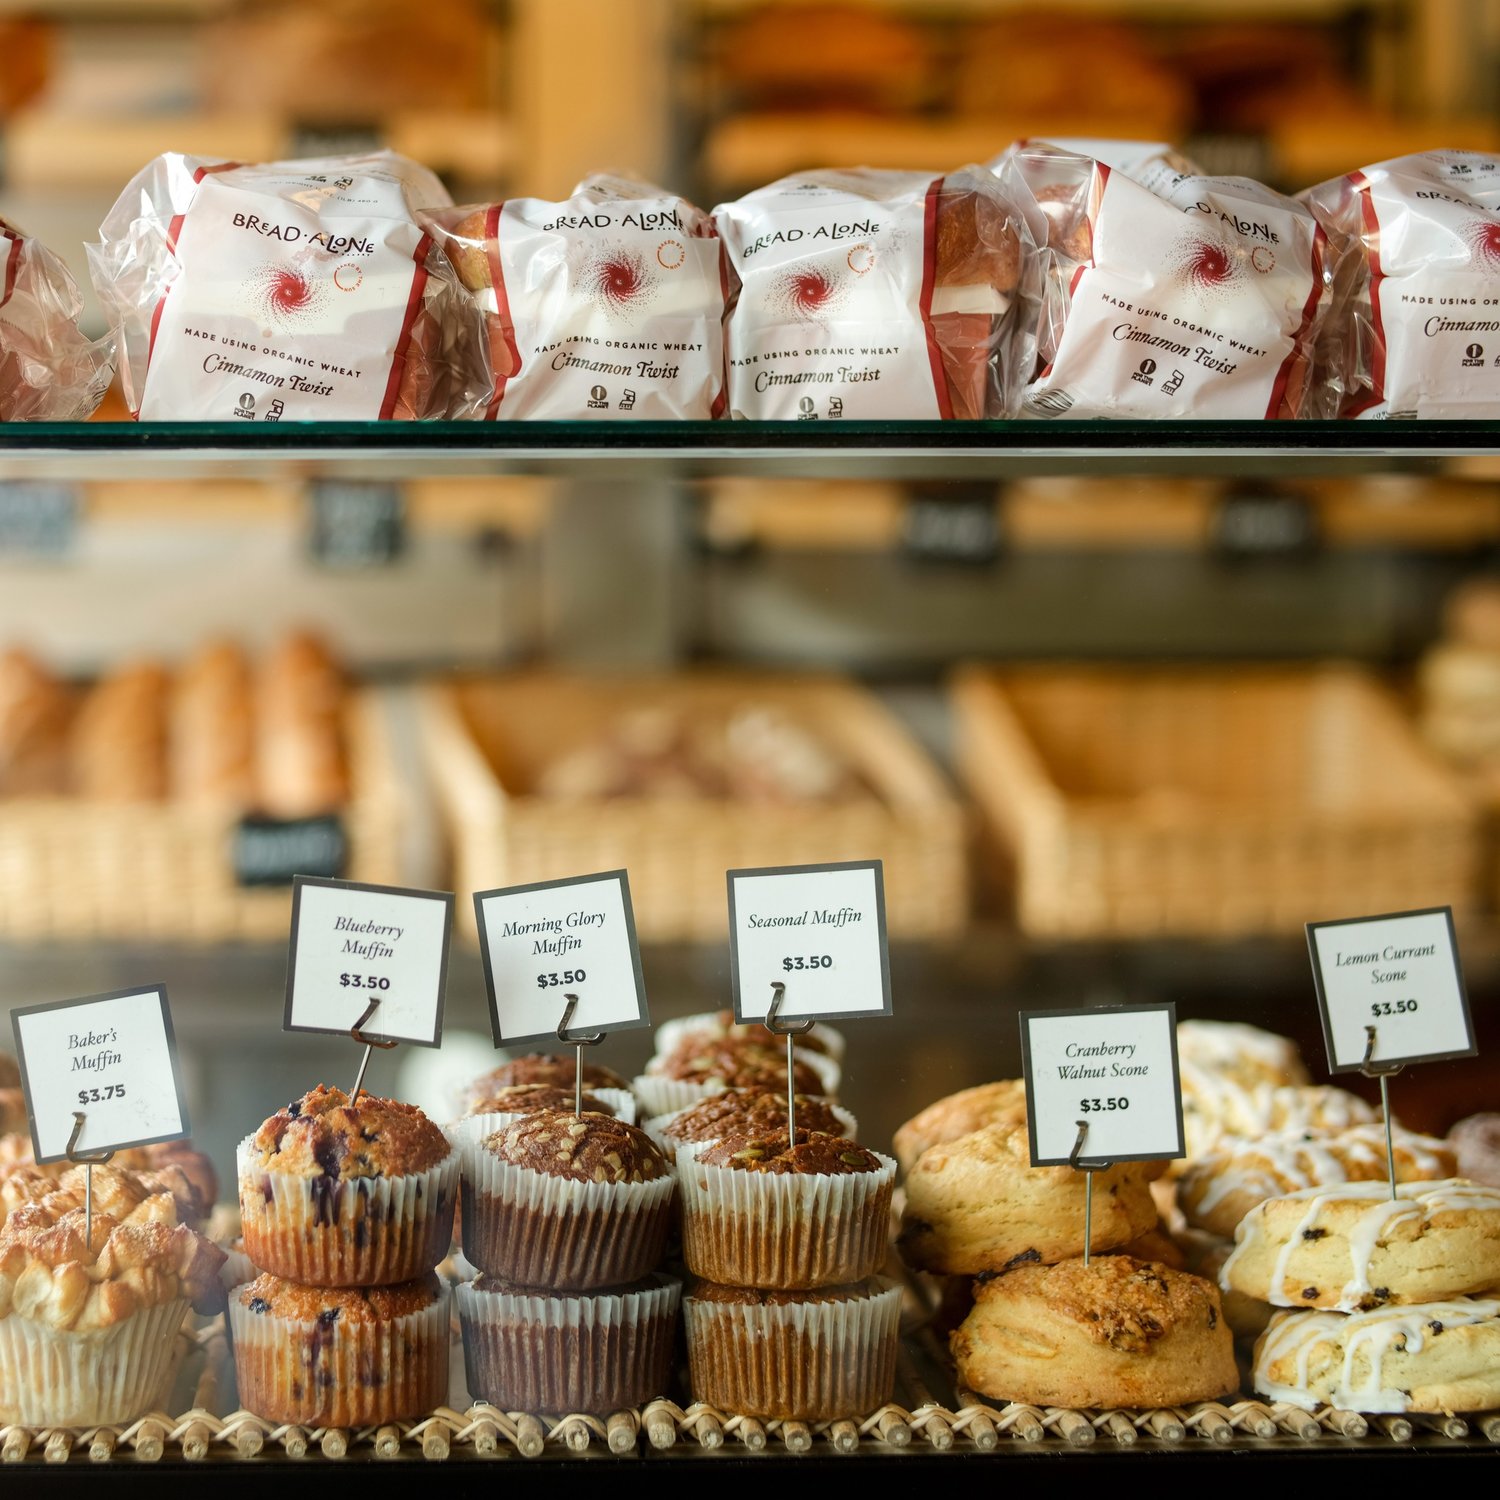 Selection of baked goods offered at Bread Alone.